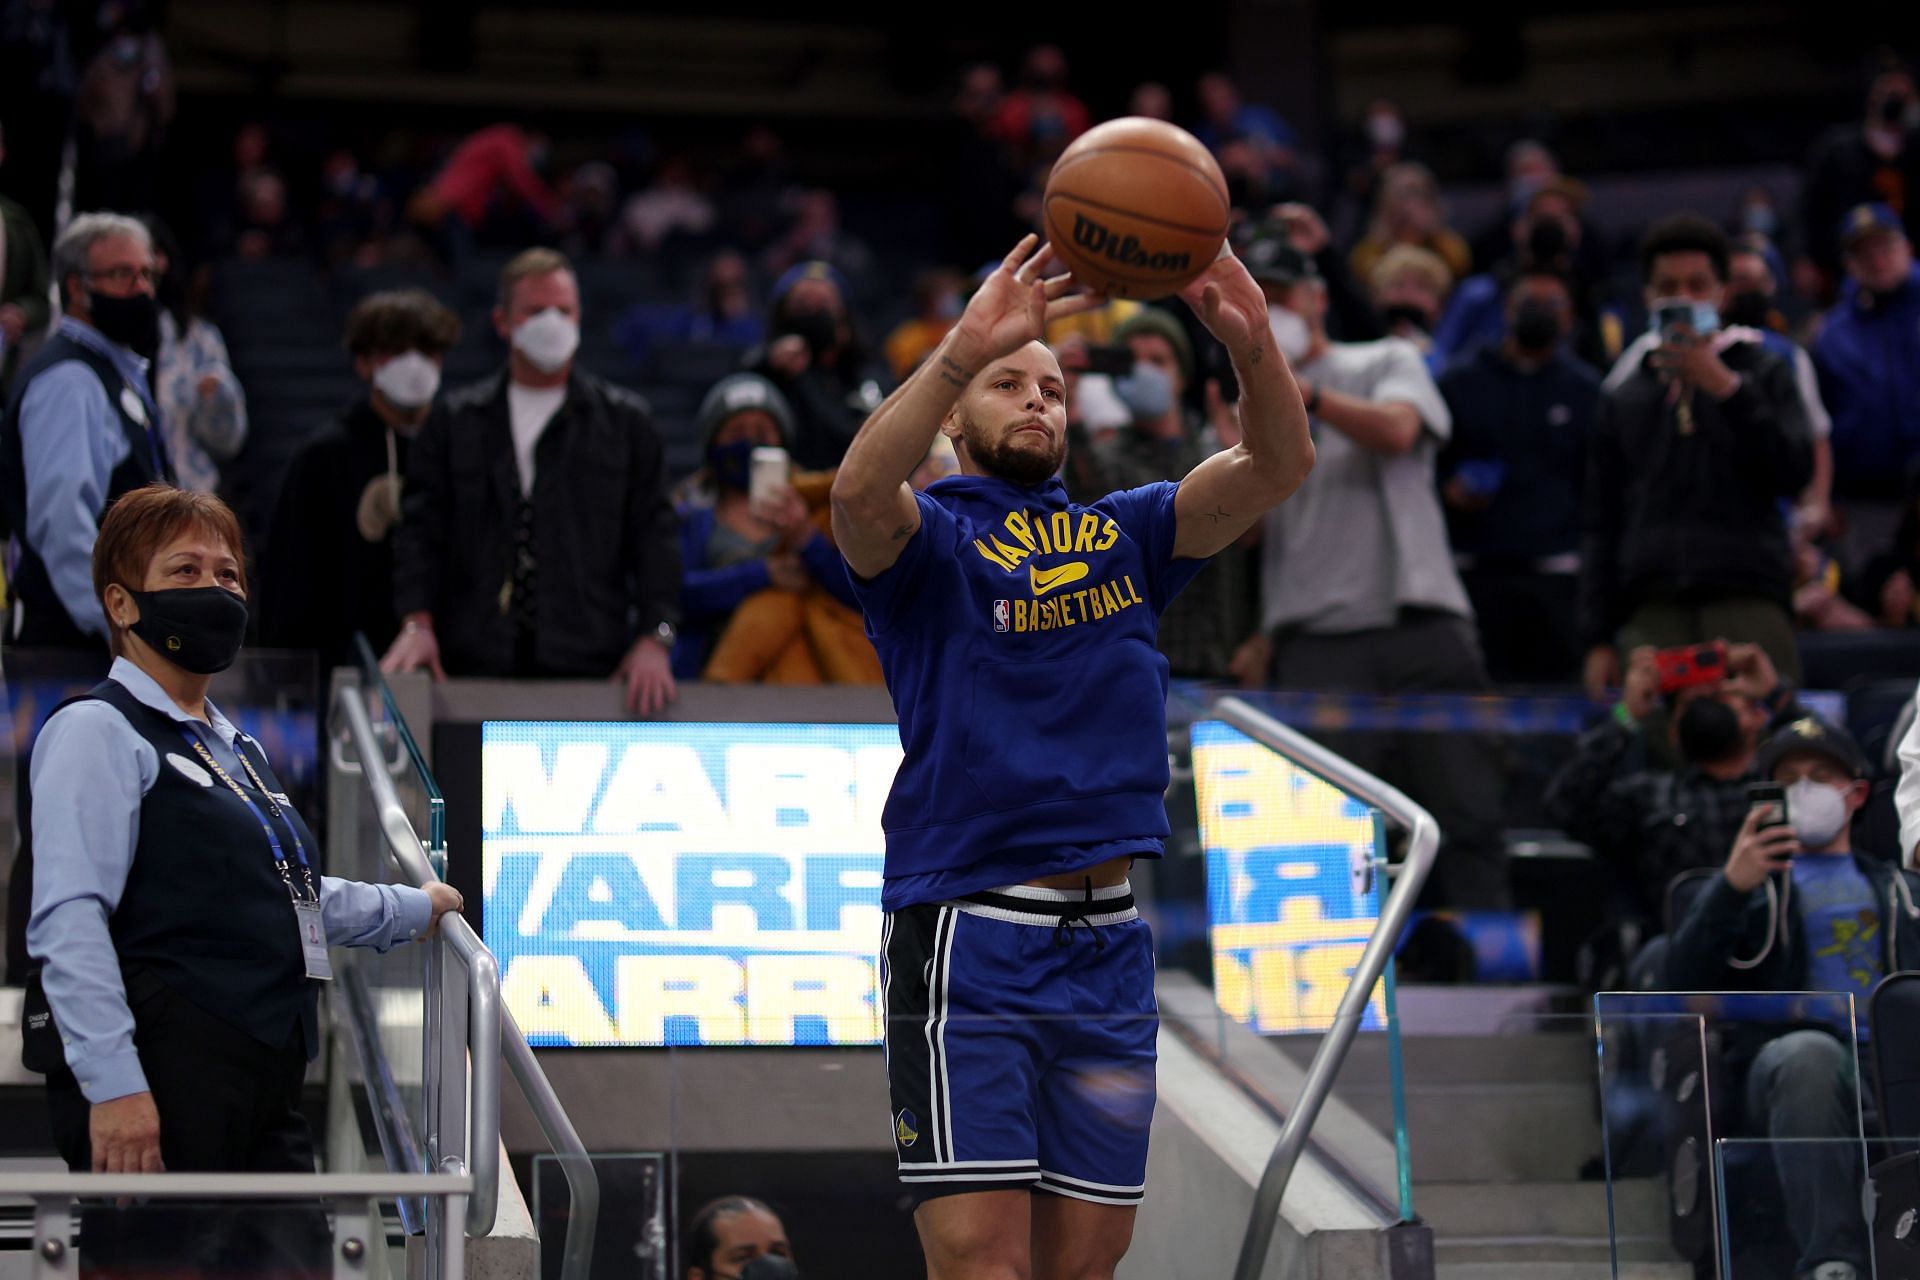 Steph Curry attempts a shot from the stands.